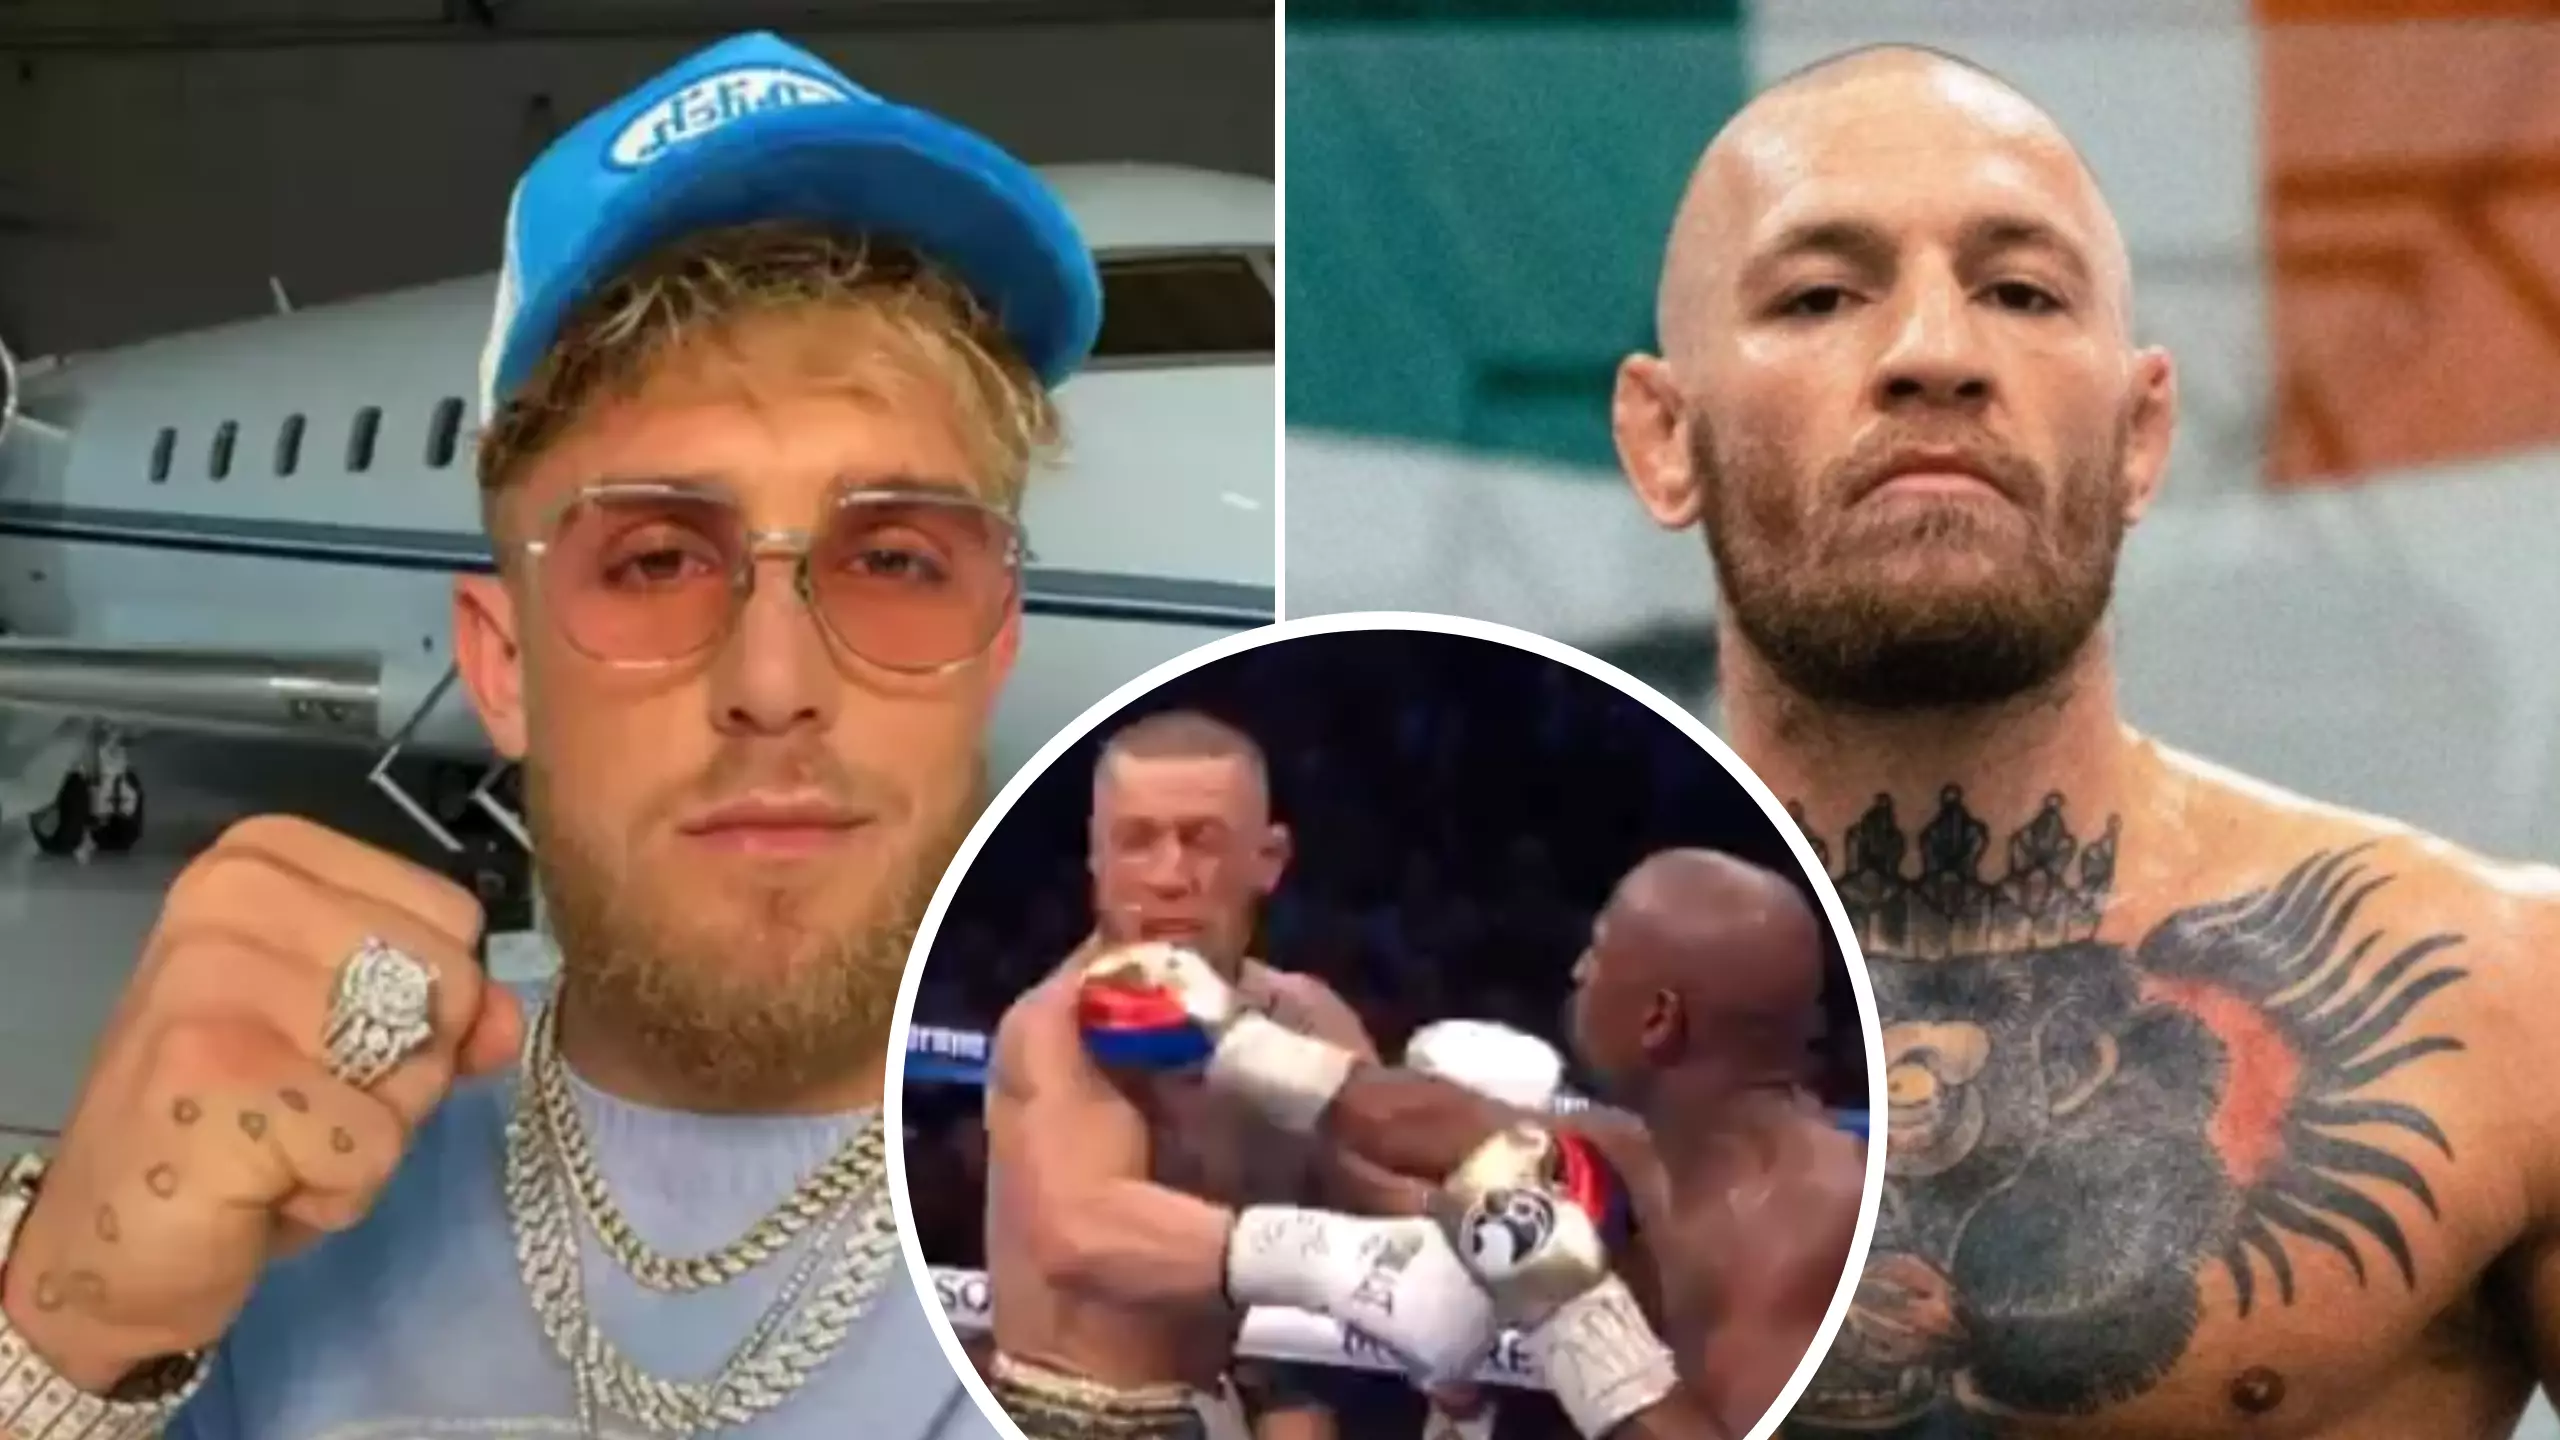 Jake Paul Plans To Face Conor McGregor In 2022 And 'Has More Boxing Experience'